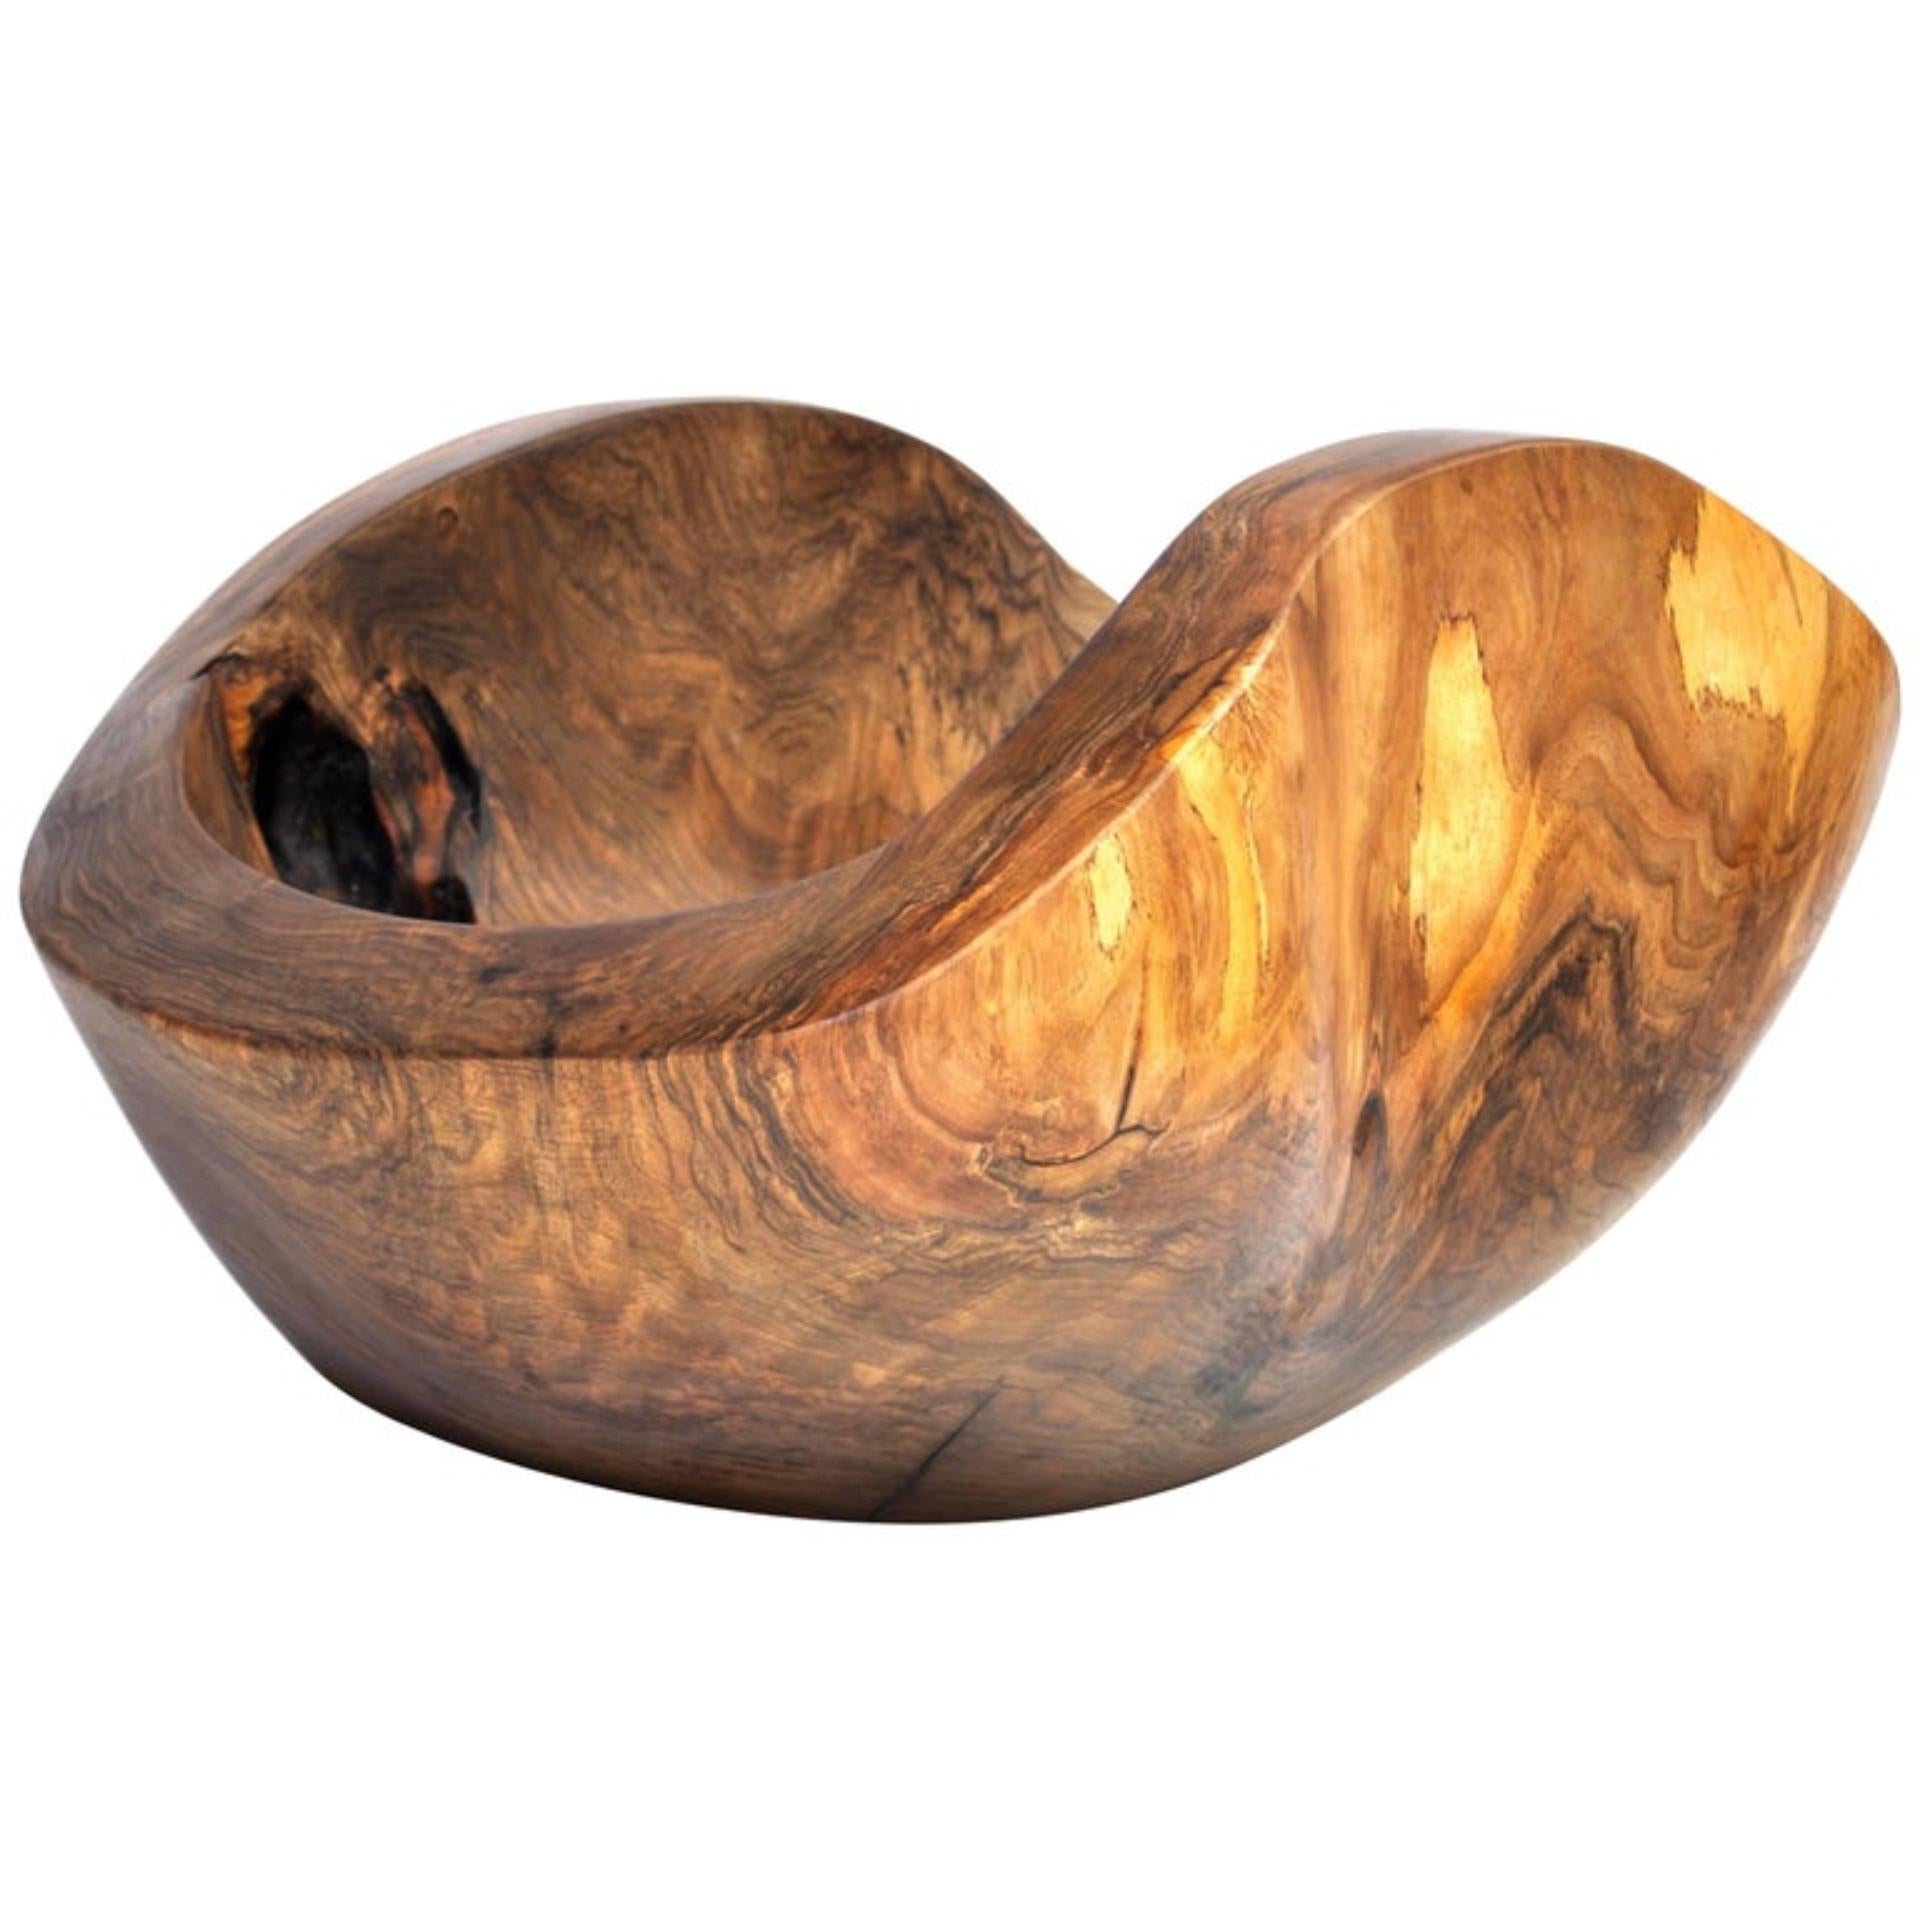 Unique signed bowl by Jörg Pietschmann
Bowl, walnut
Measures: H 44 x W 94 x D 69 cm
Crafted from a huge very old European walnut tree.
Polished oil finish.

In Pietschmann’s sculptures, trees that for centuries were part of a landscape and founded